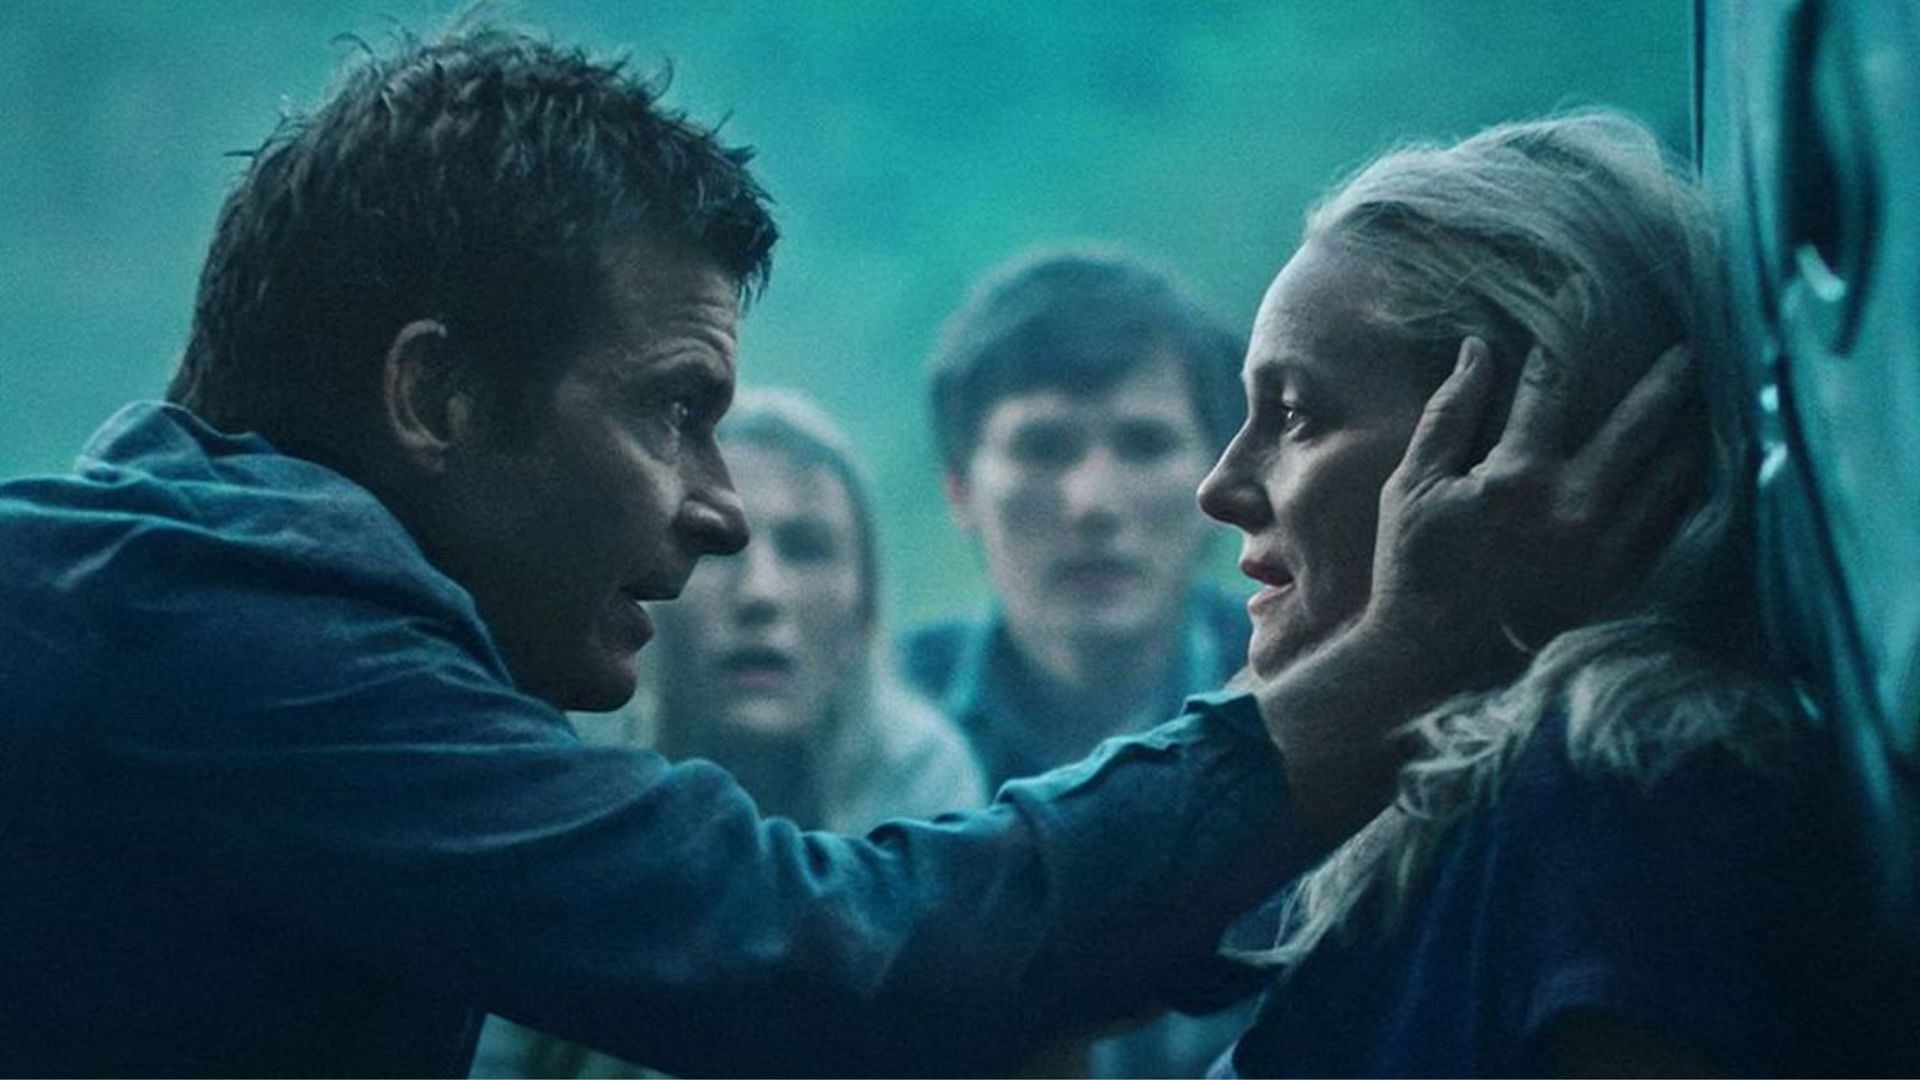 Ozark Season 4 Part 2 review: An undeniably arresting and strikingly moving final chapter